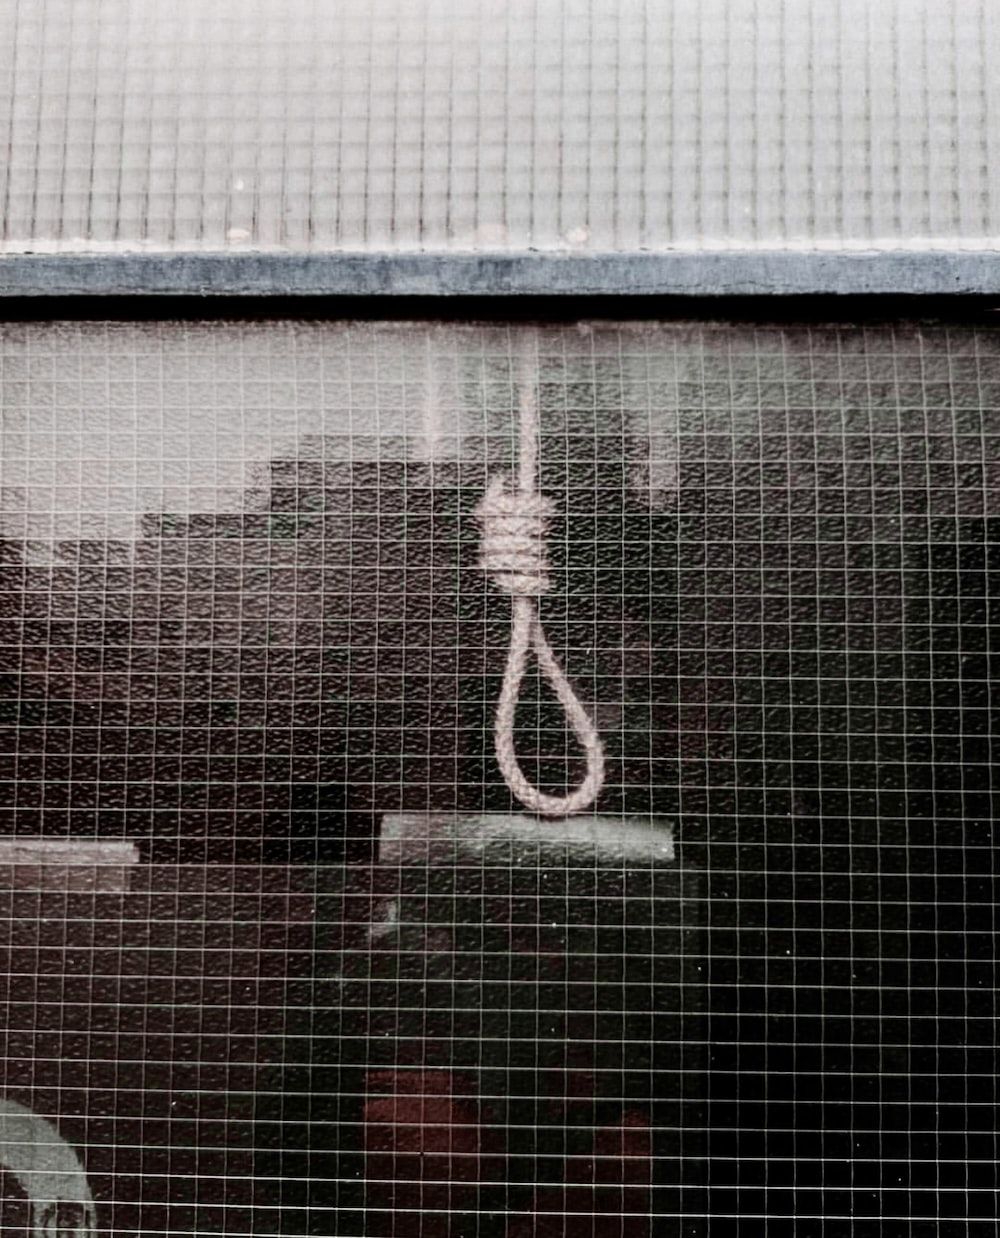 A noose hanging from a window - Grunge